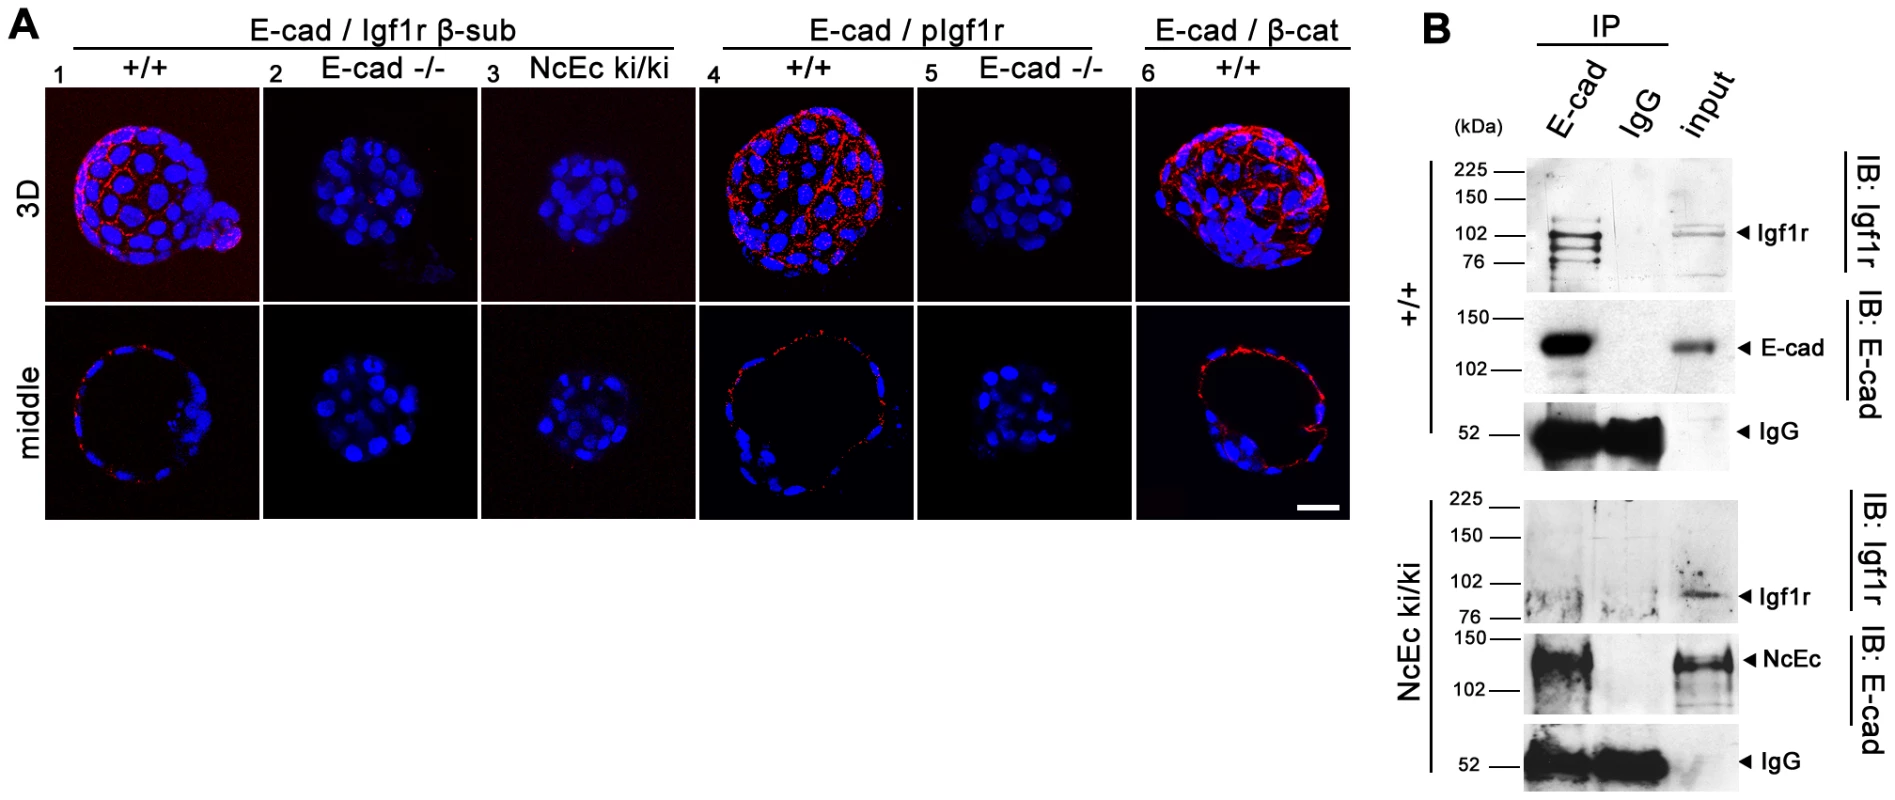 E-cad interacts with Igf1r and increases receptor activity in TE cells.